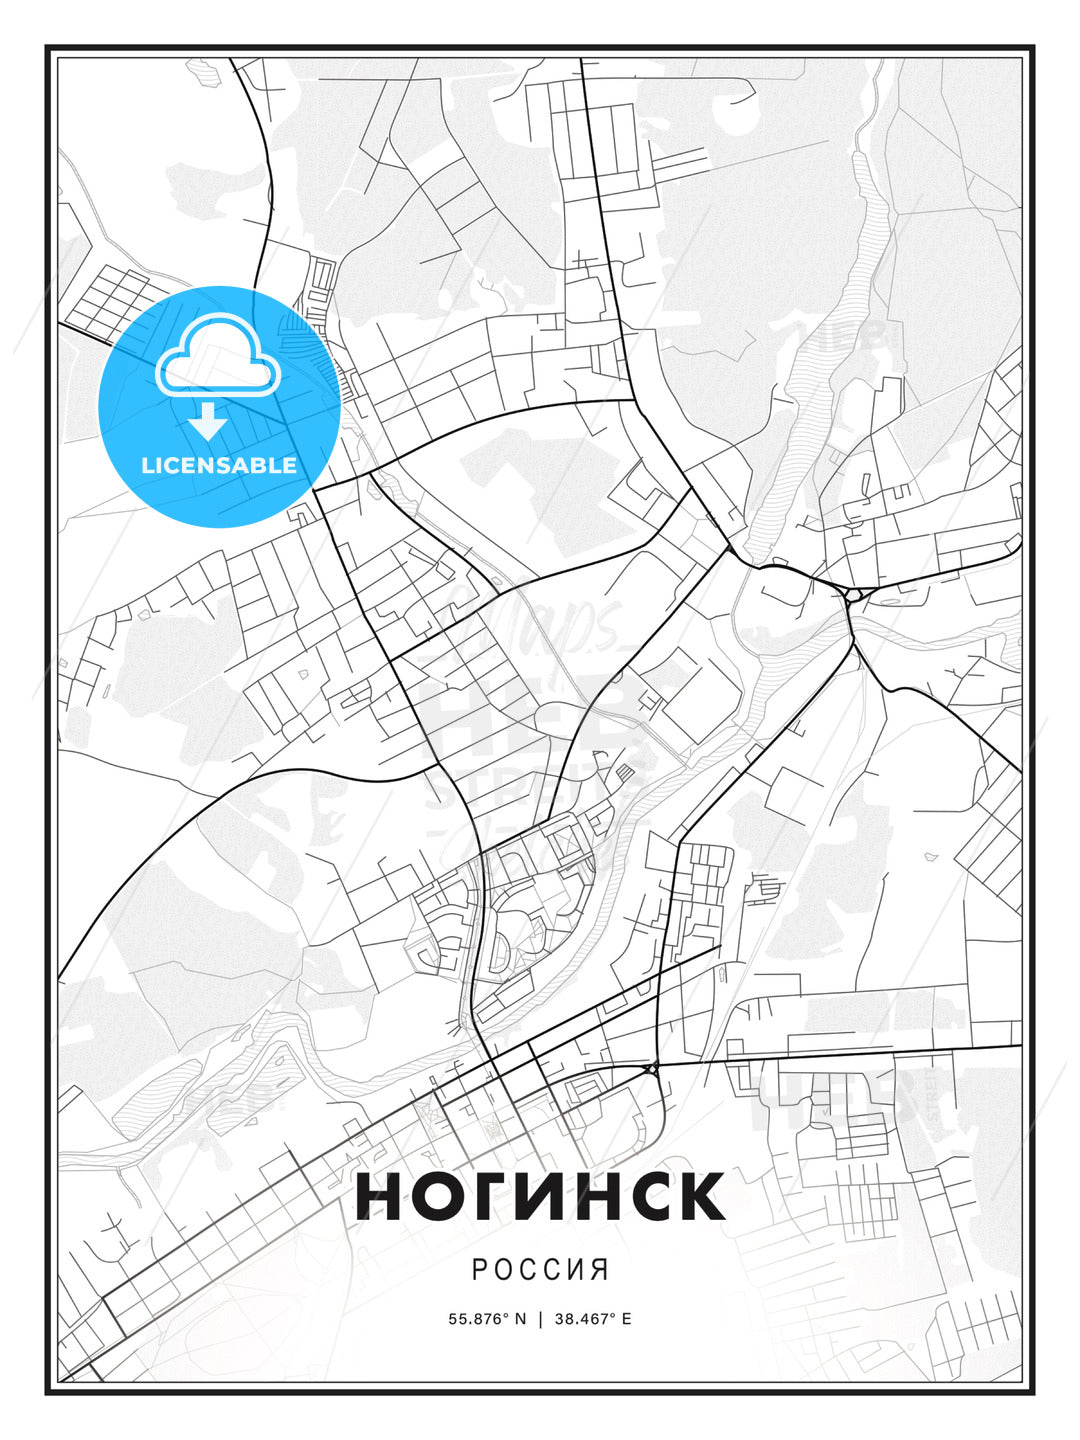 НОГИНСК / Noginsk, Russia, Modern Print Template in Various Formats - HEBSTREITS Sketches